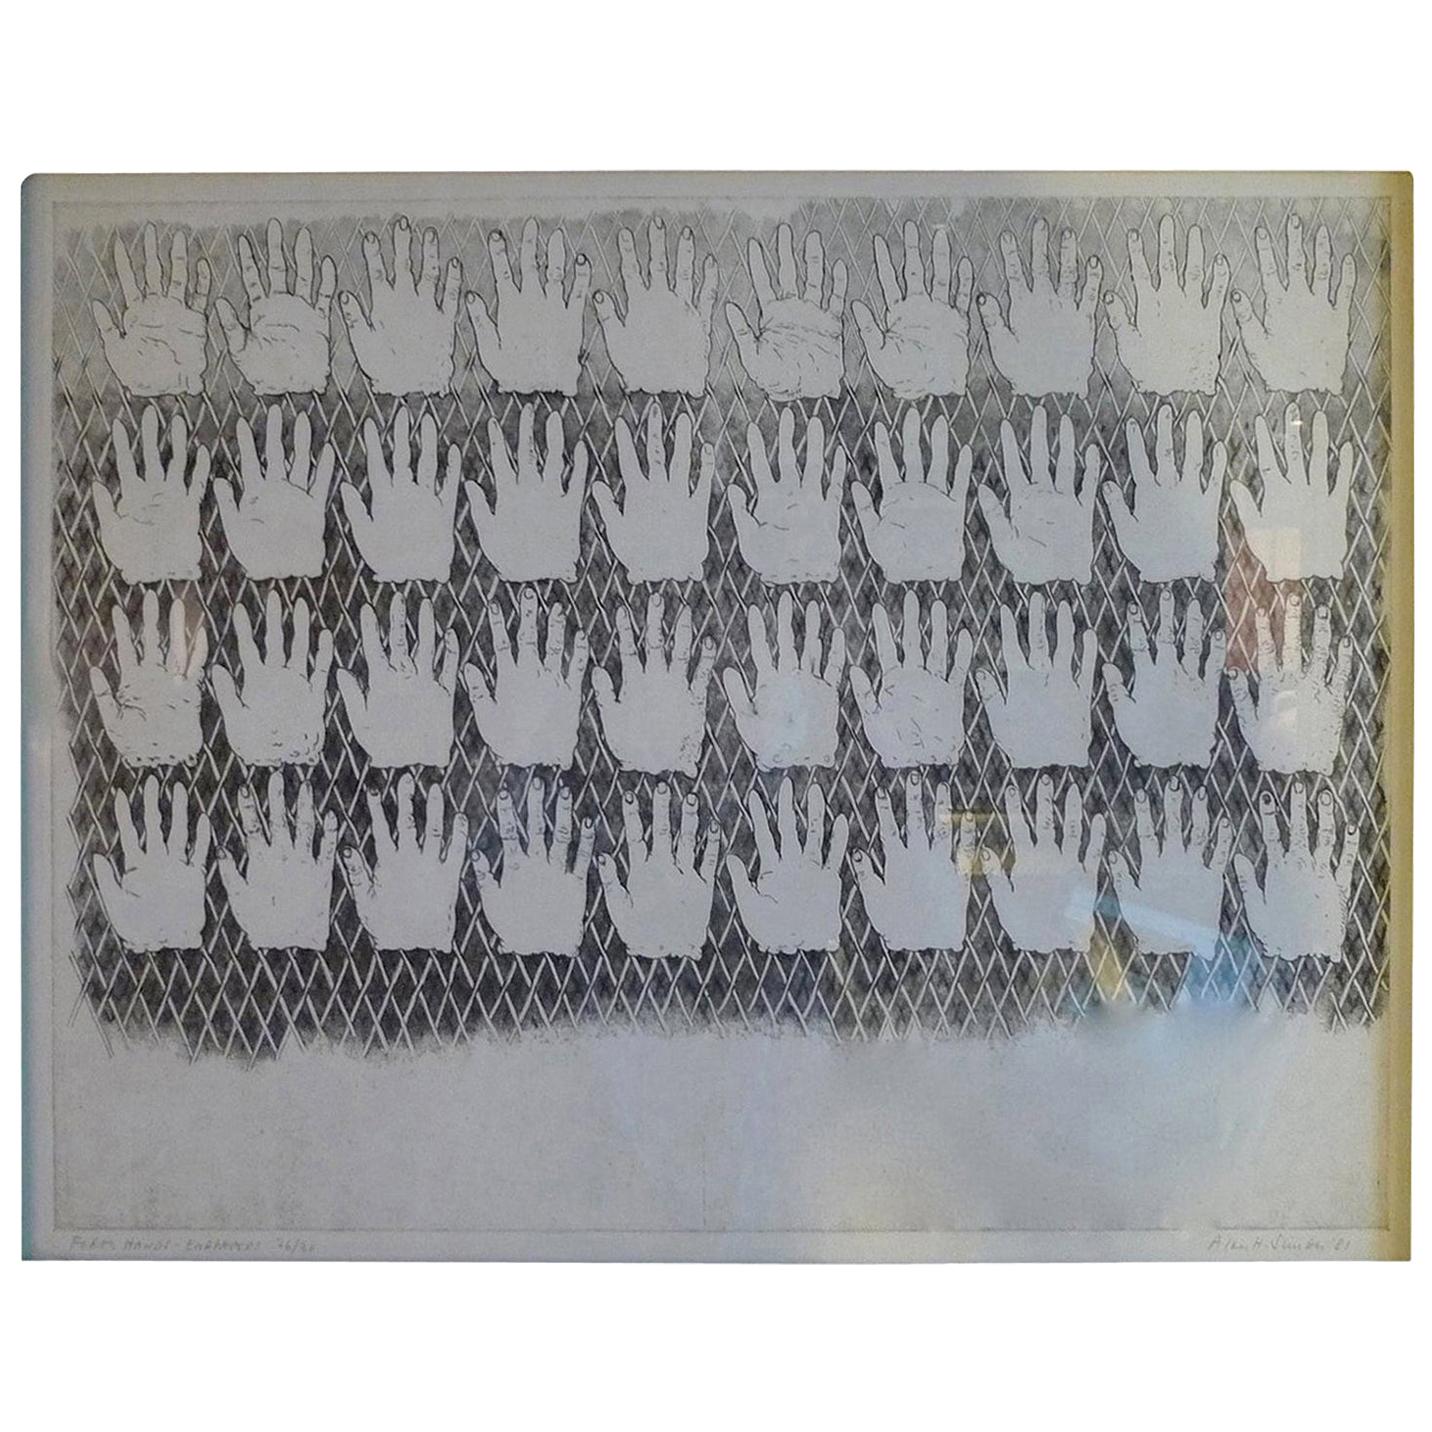 Forty Hands, Endpapers by Alan H Simon from UCLA